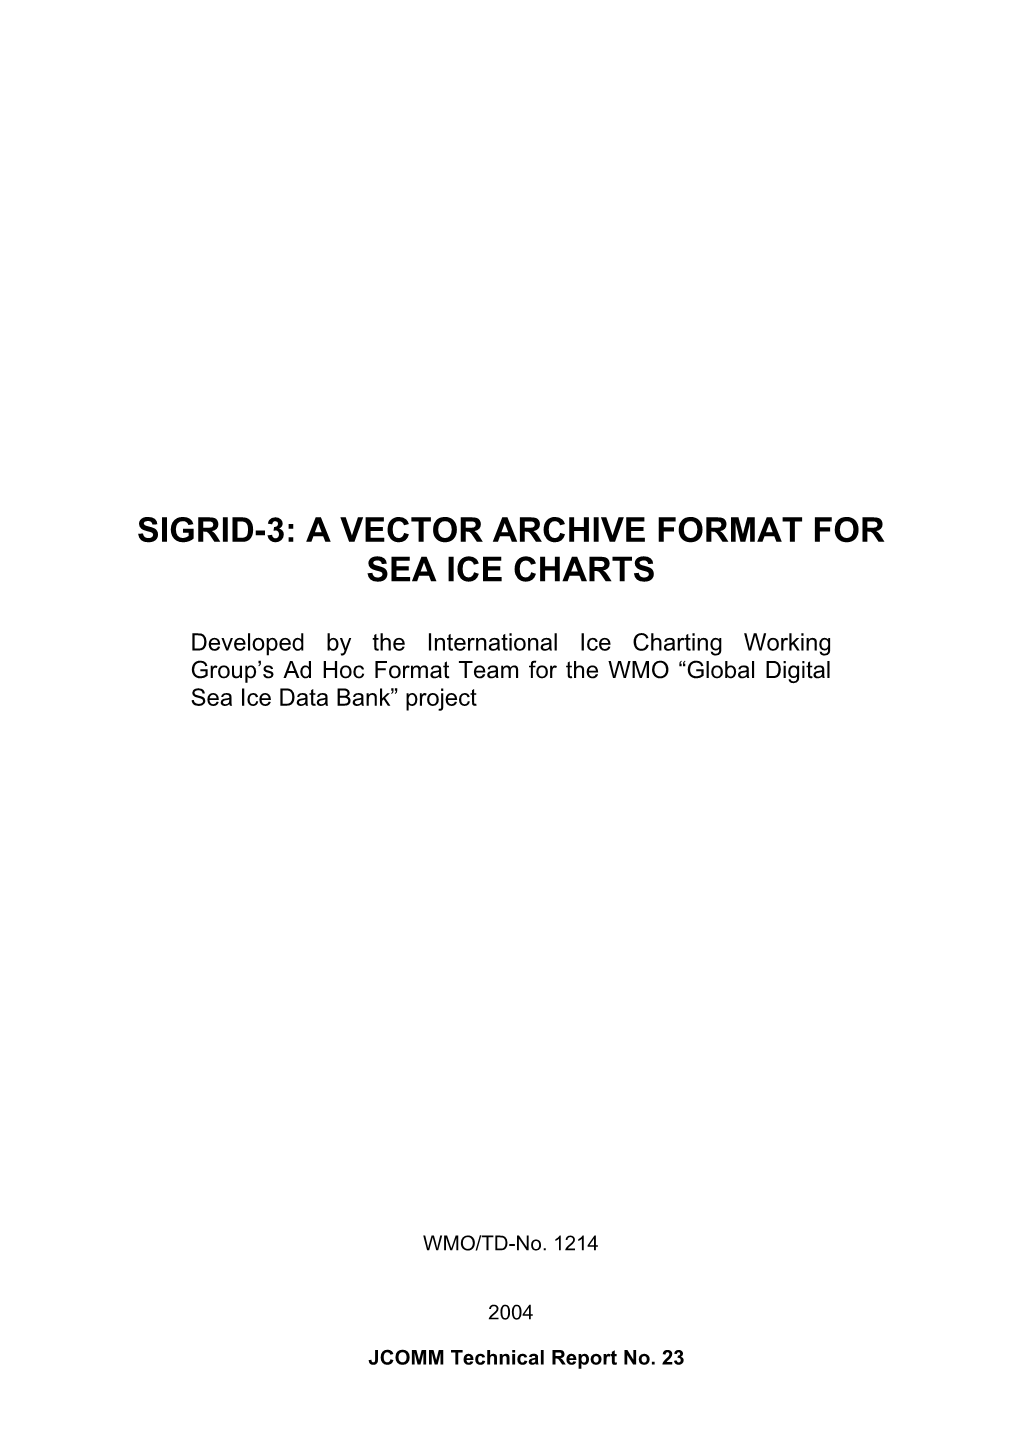 SIGRID-3: a Vector Archive Format for Sea Ice Charts